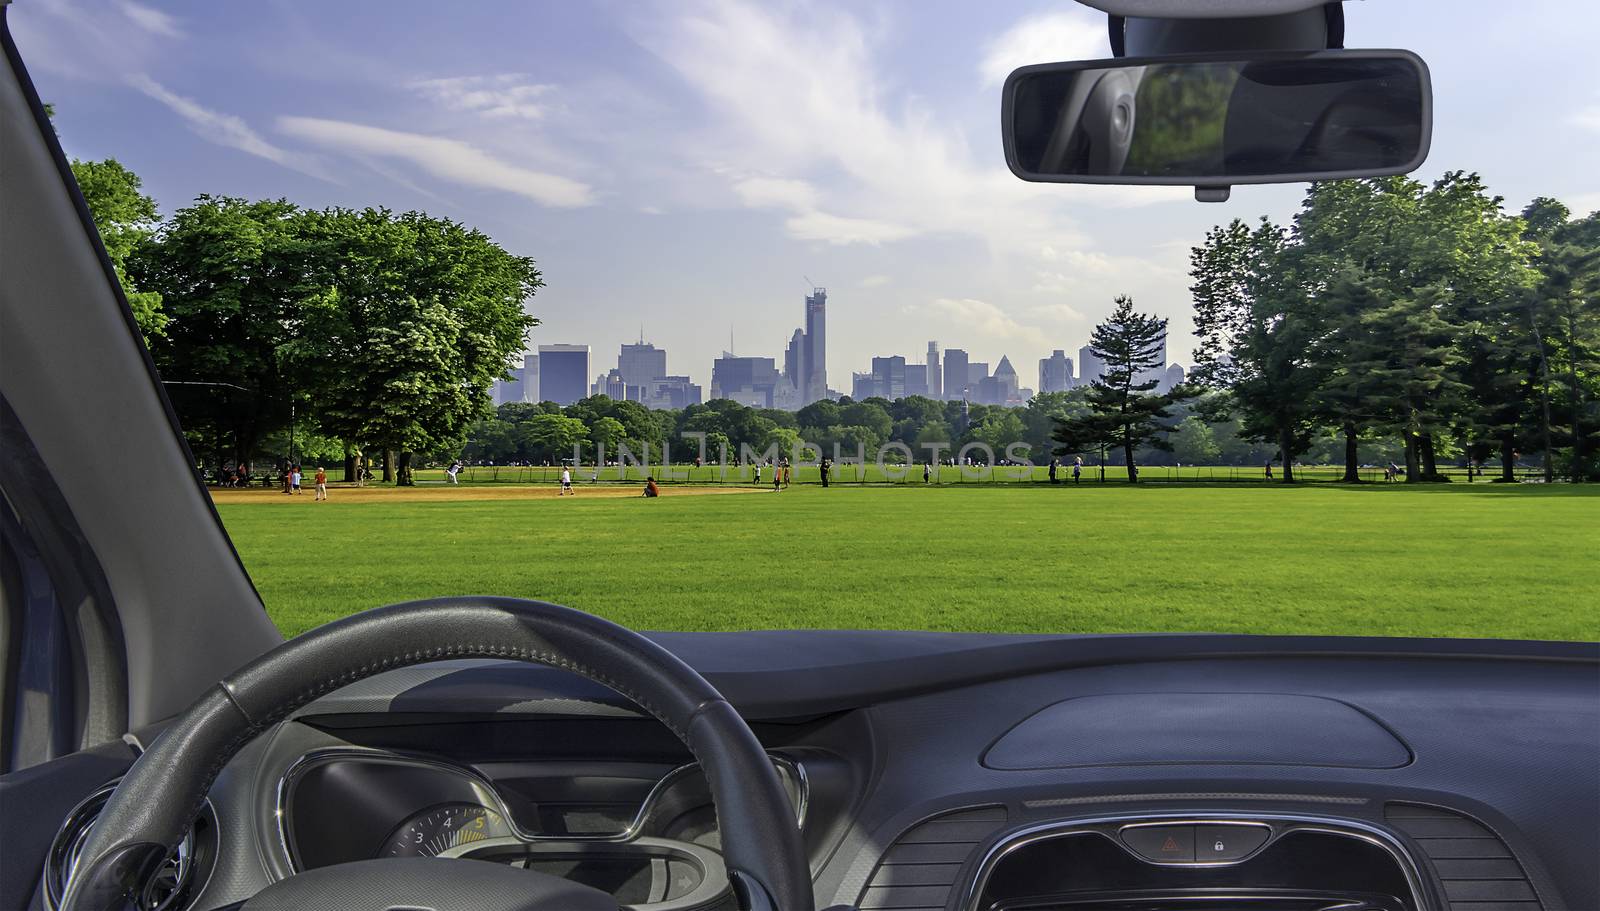 Looking through a car windshield with view of Central Park and a beautiful contrast between skyscrapers and buildings, Manhattan, New York City, USA